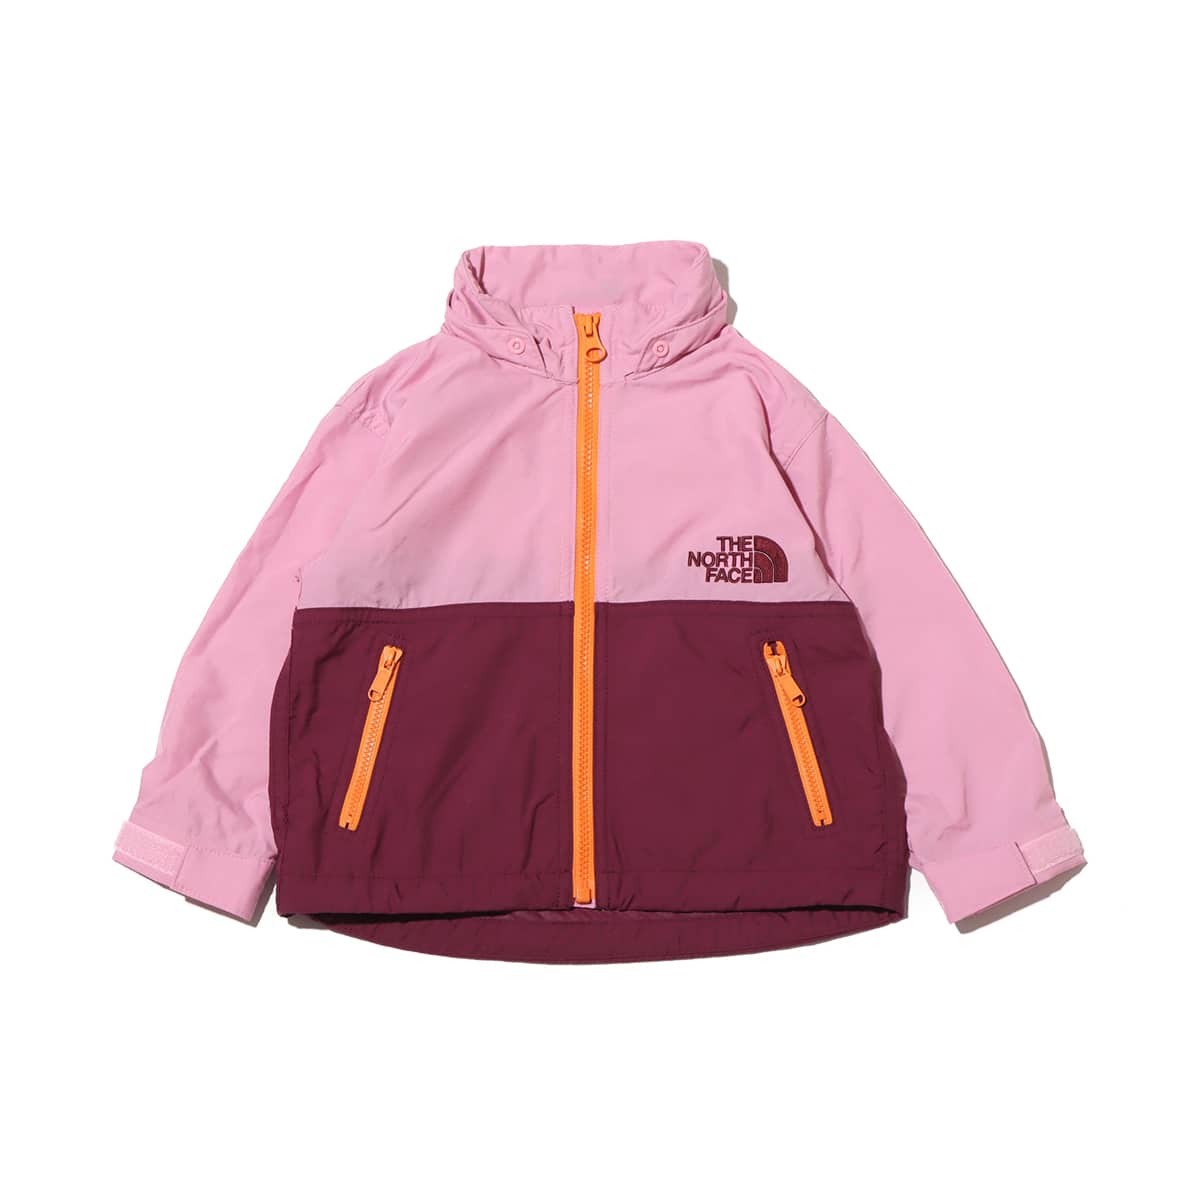 THE NORTH FACE BABY COMPACT JACKET OピンXB 23FW-I